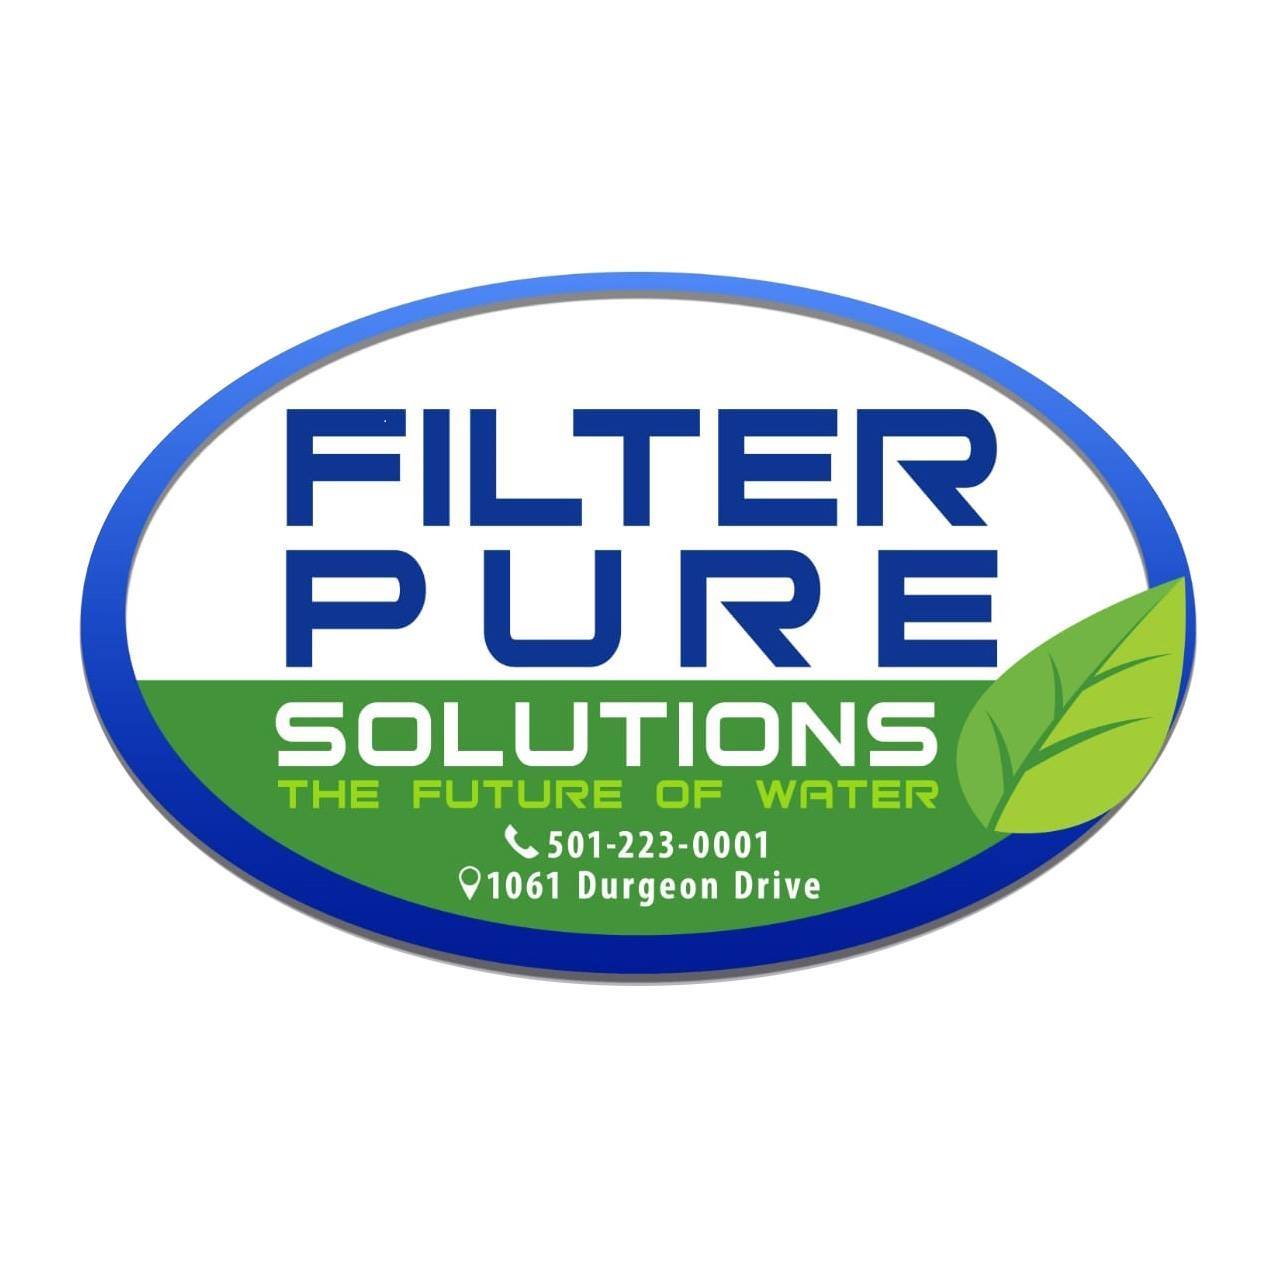 Filter Pure Solutions - Belize, Central America